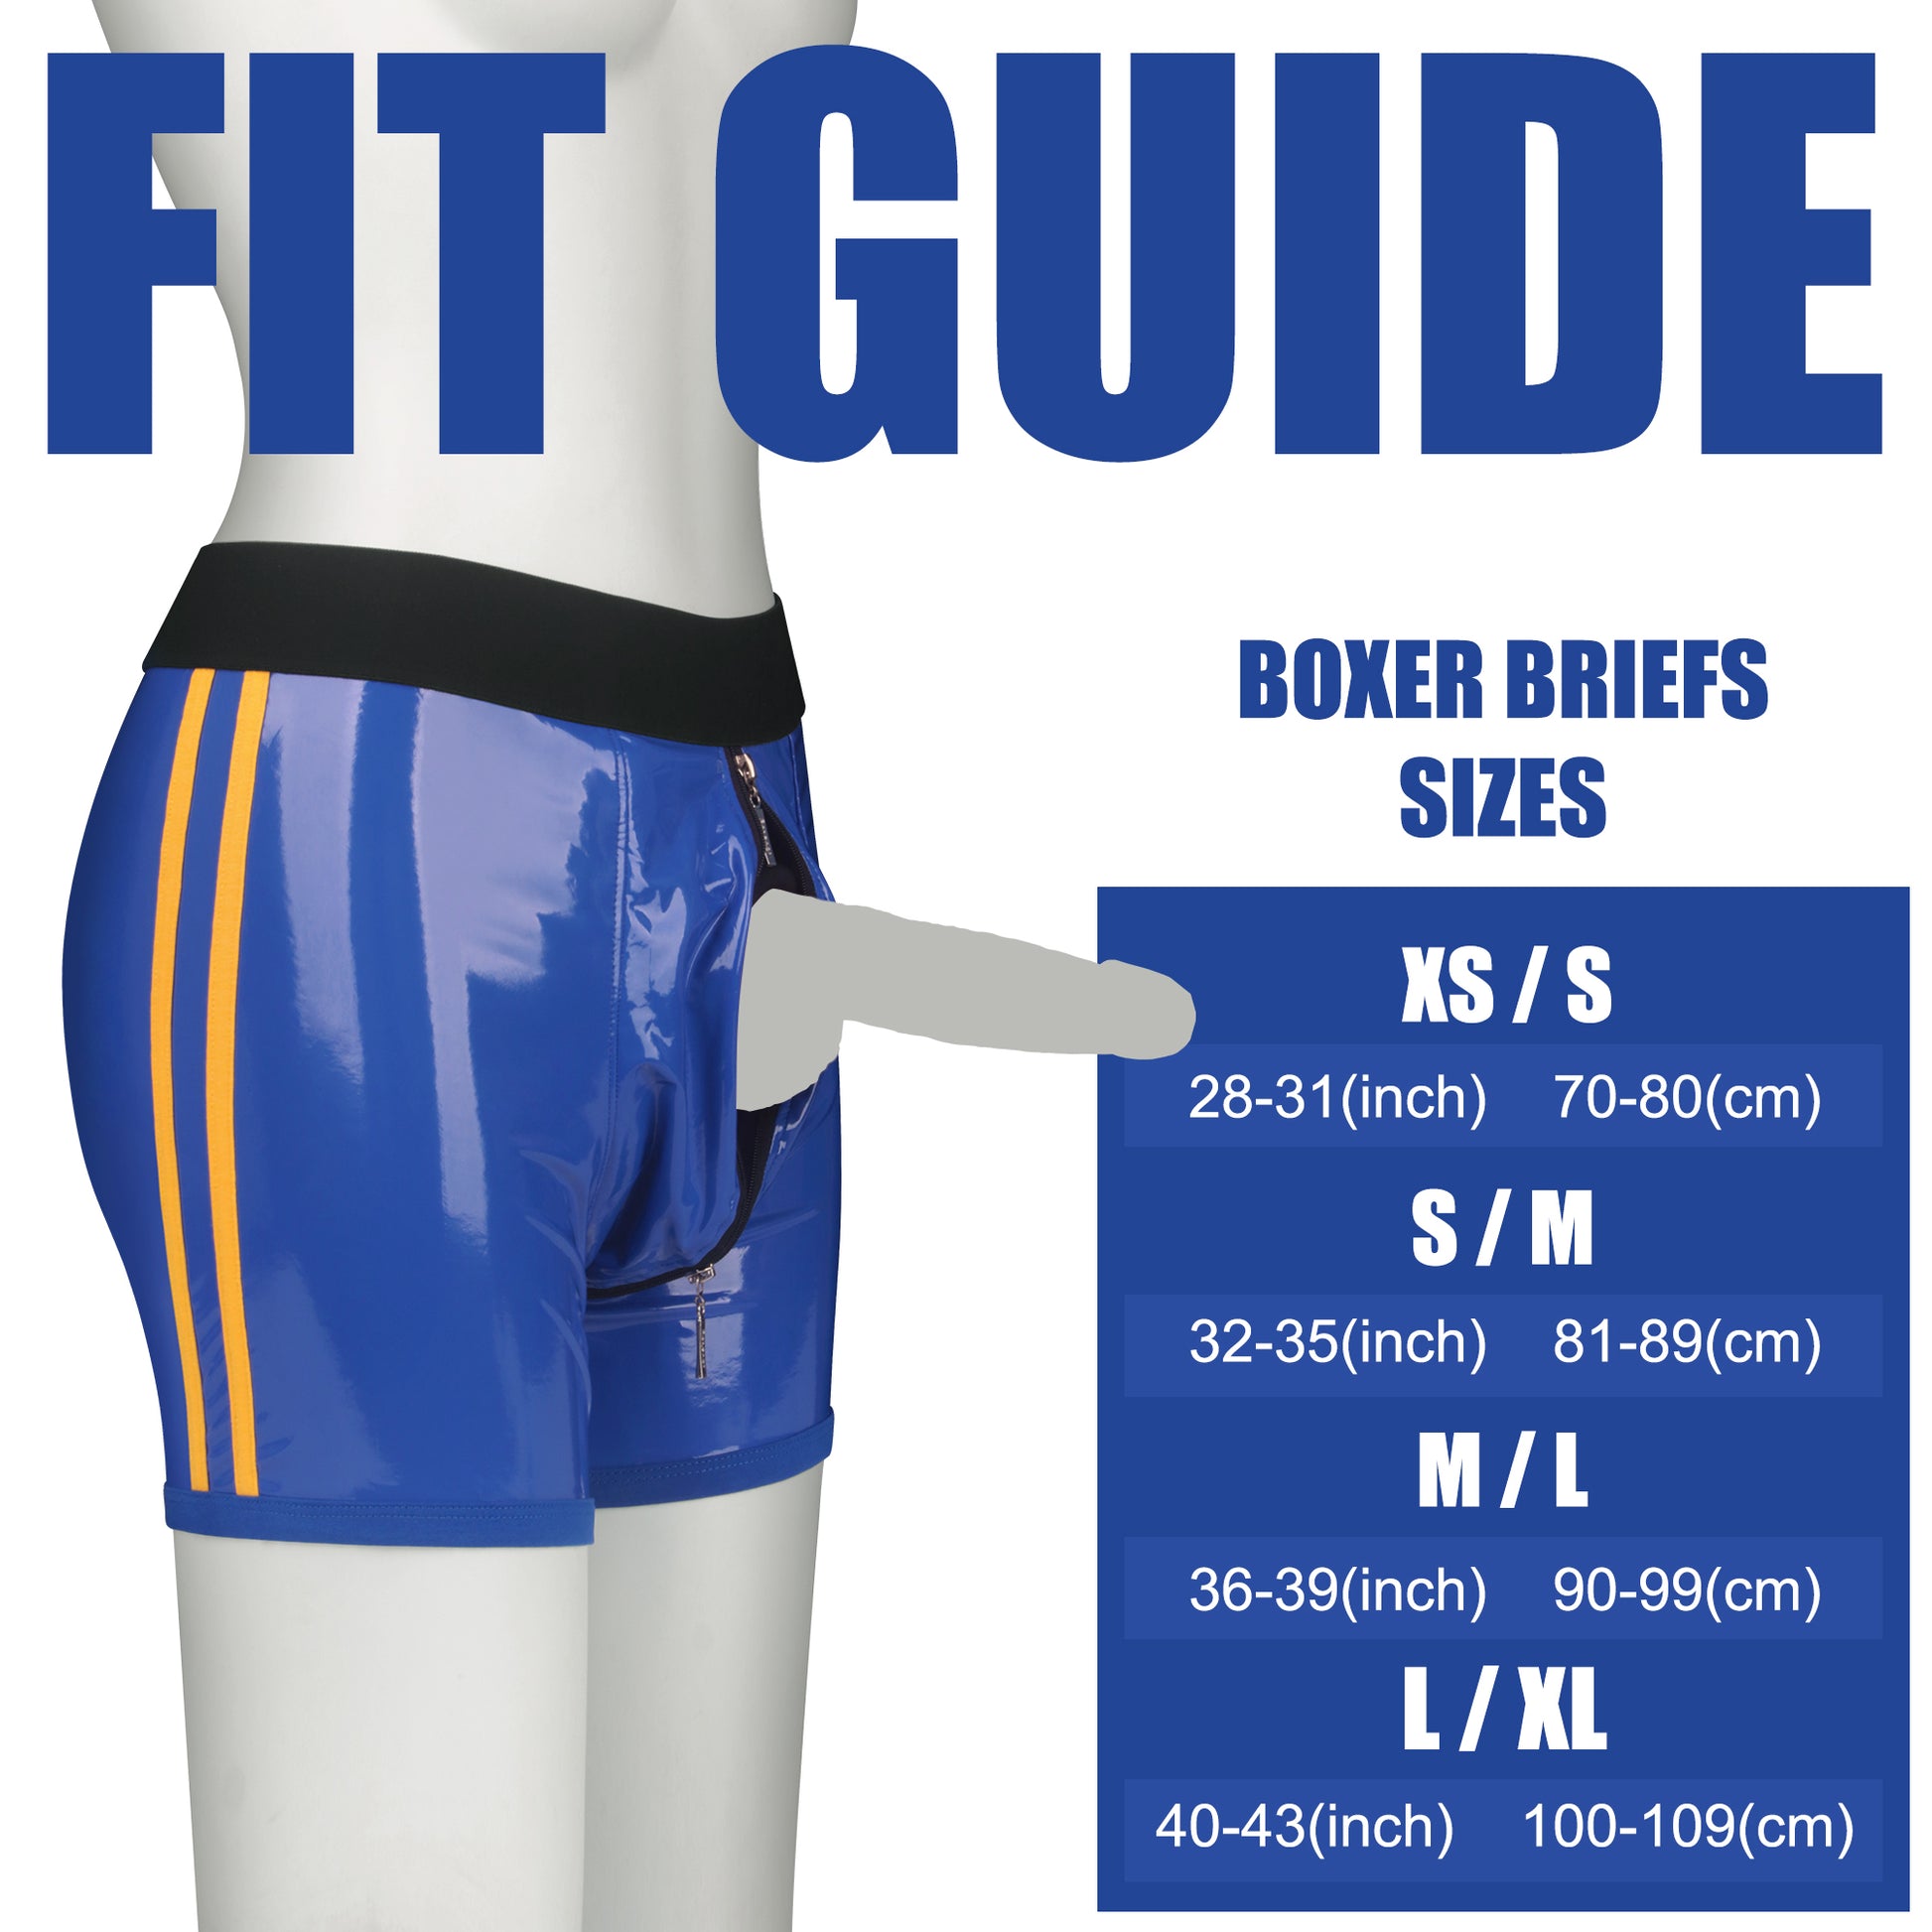 The size chart of the blue faux leather strap on shorts